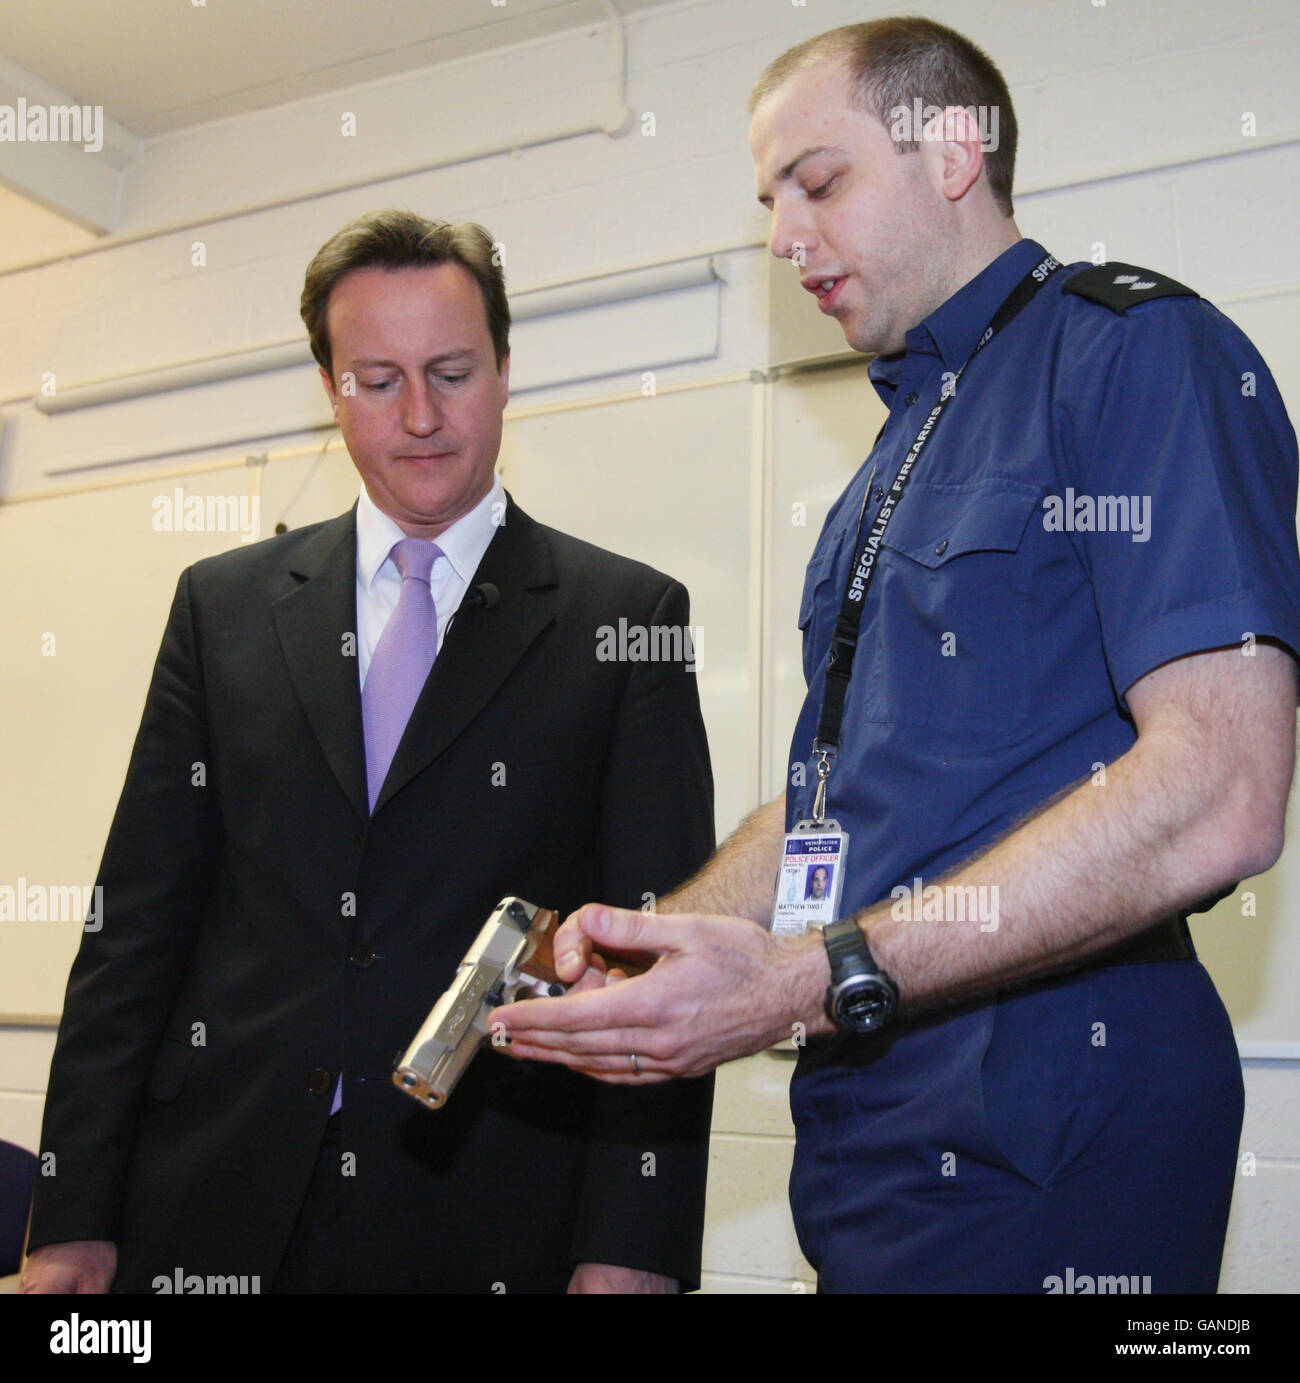 Conservative leader David Cameron (left) with firearms officer Matt Twist and a display of confiscated weapons during a visit to Lambeth Support Headquarters, south London. Stock Photo